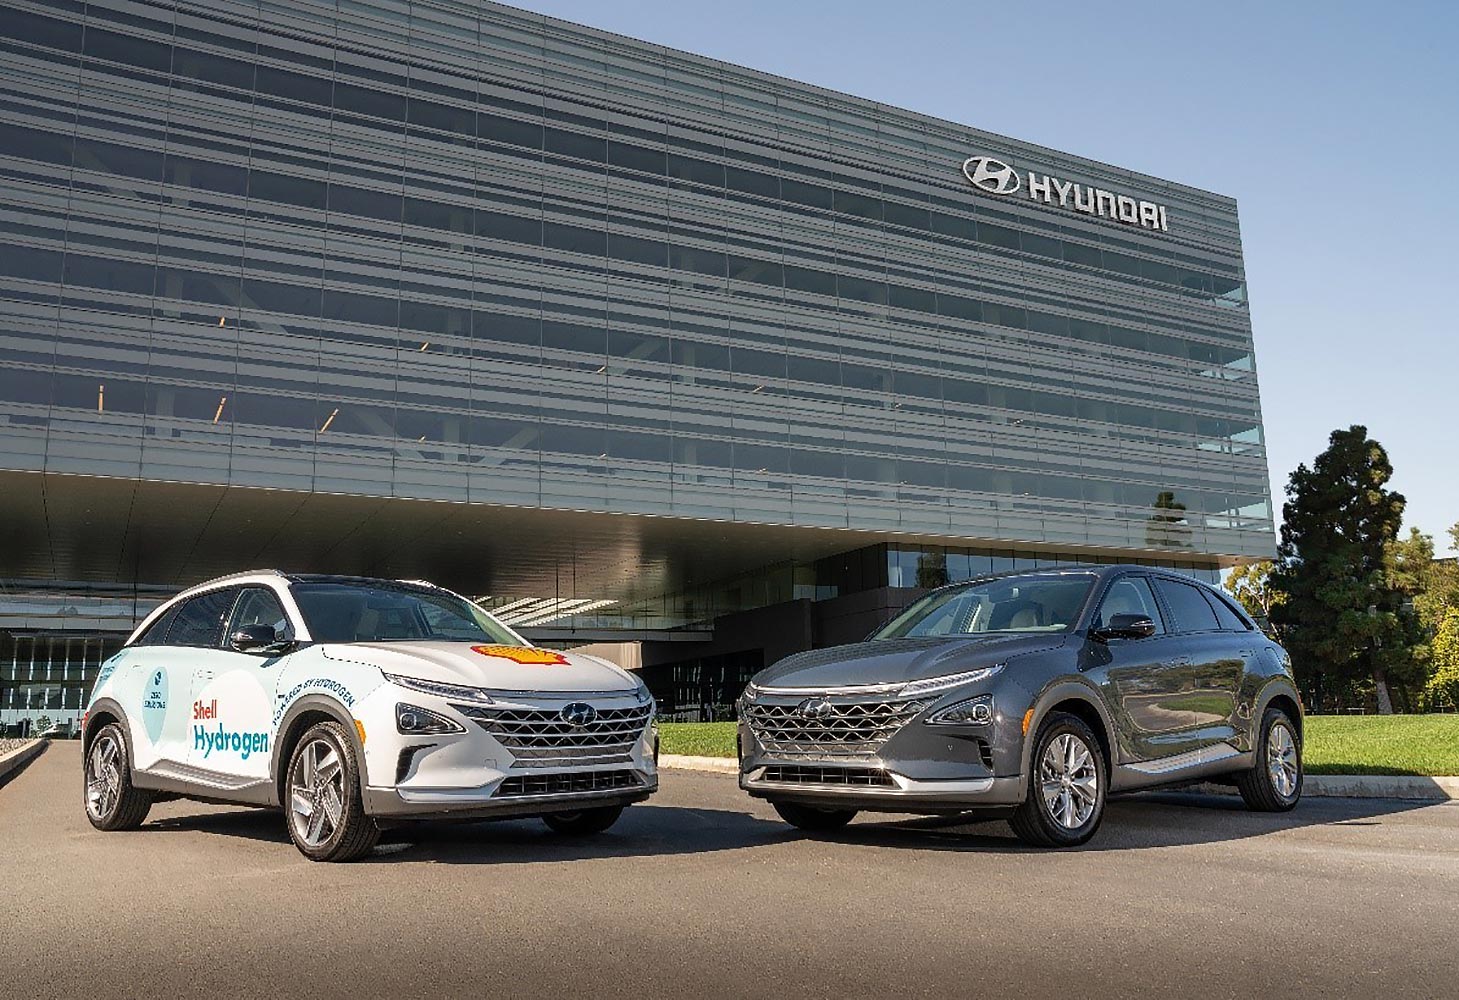 Hyundai Motor joins Shell to expand hydrogen fueling stations